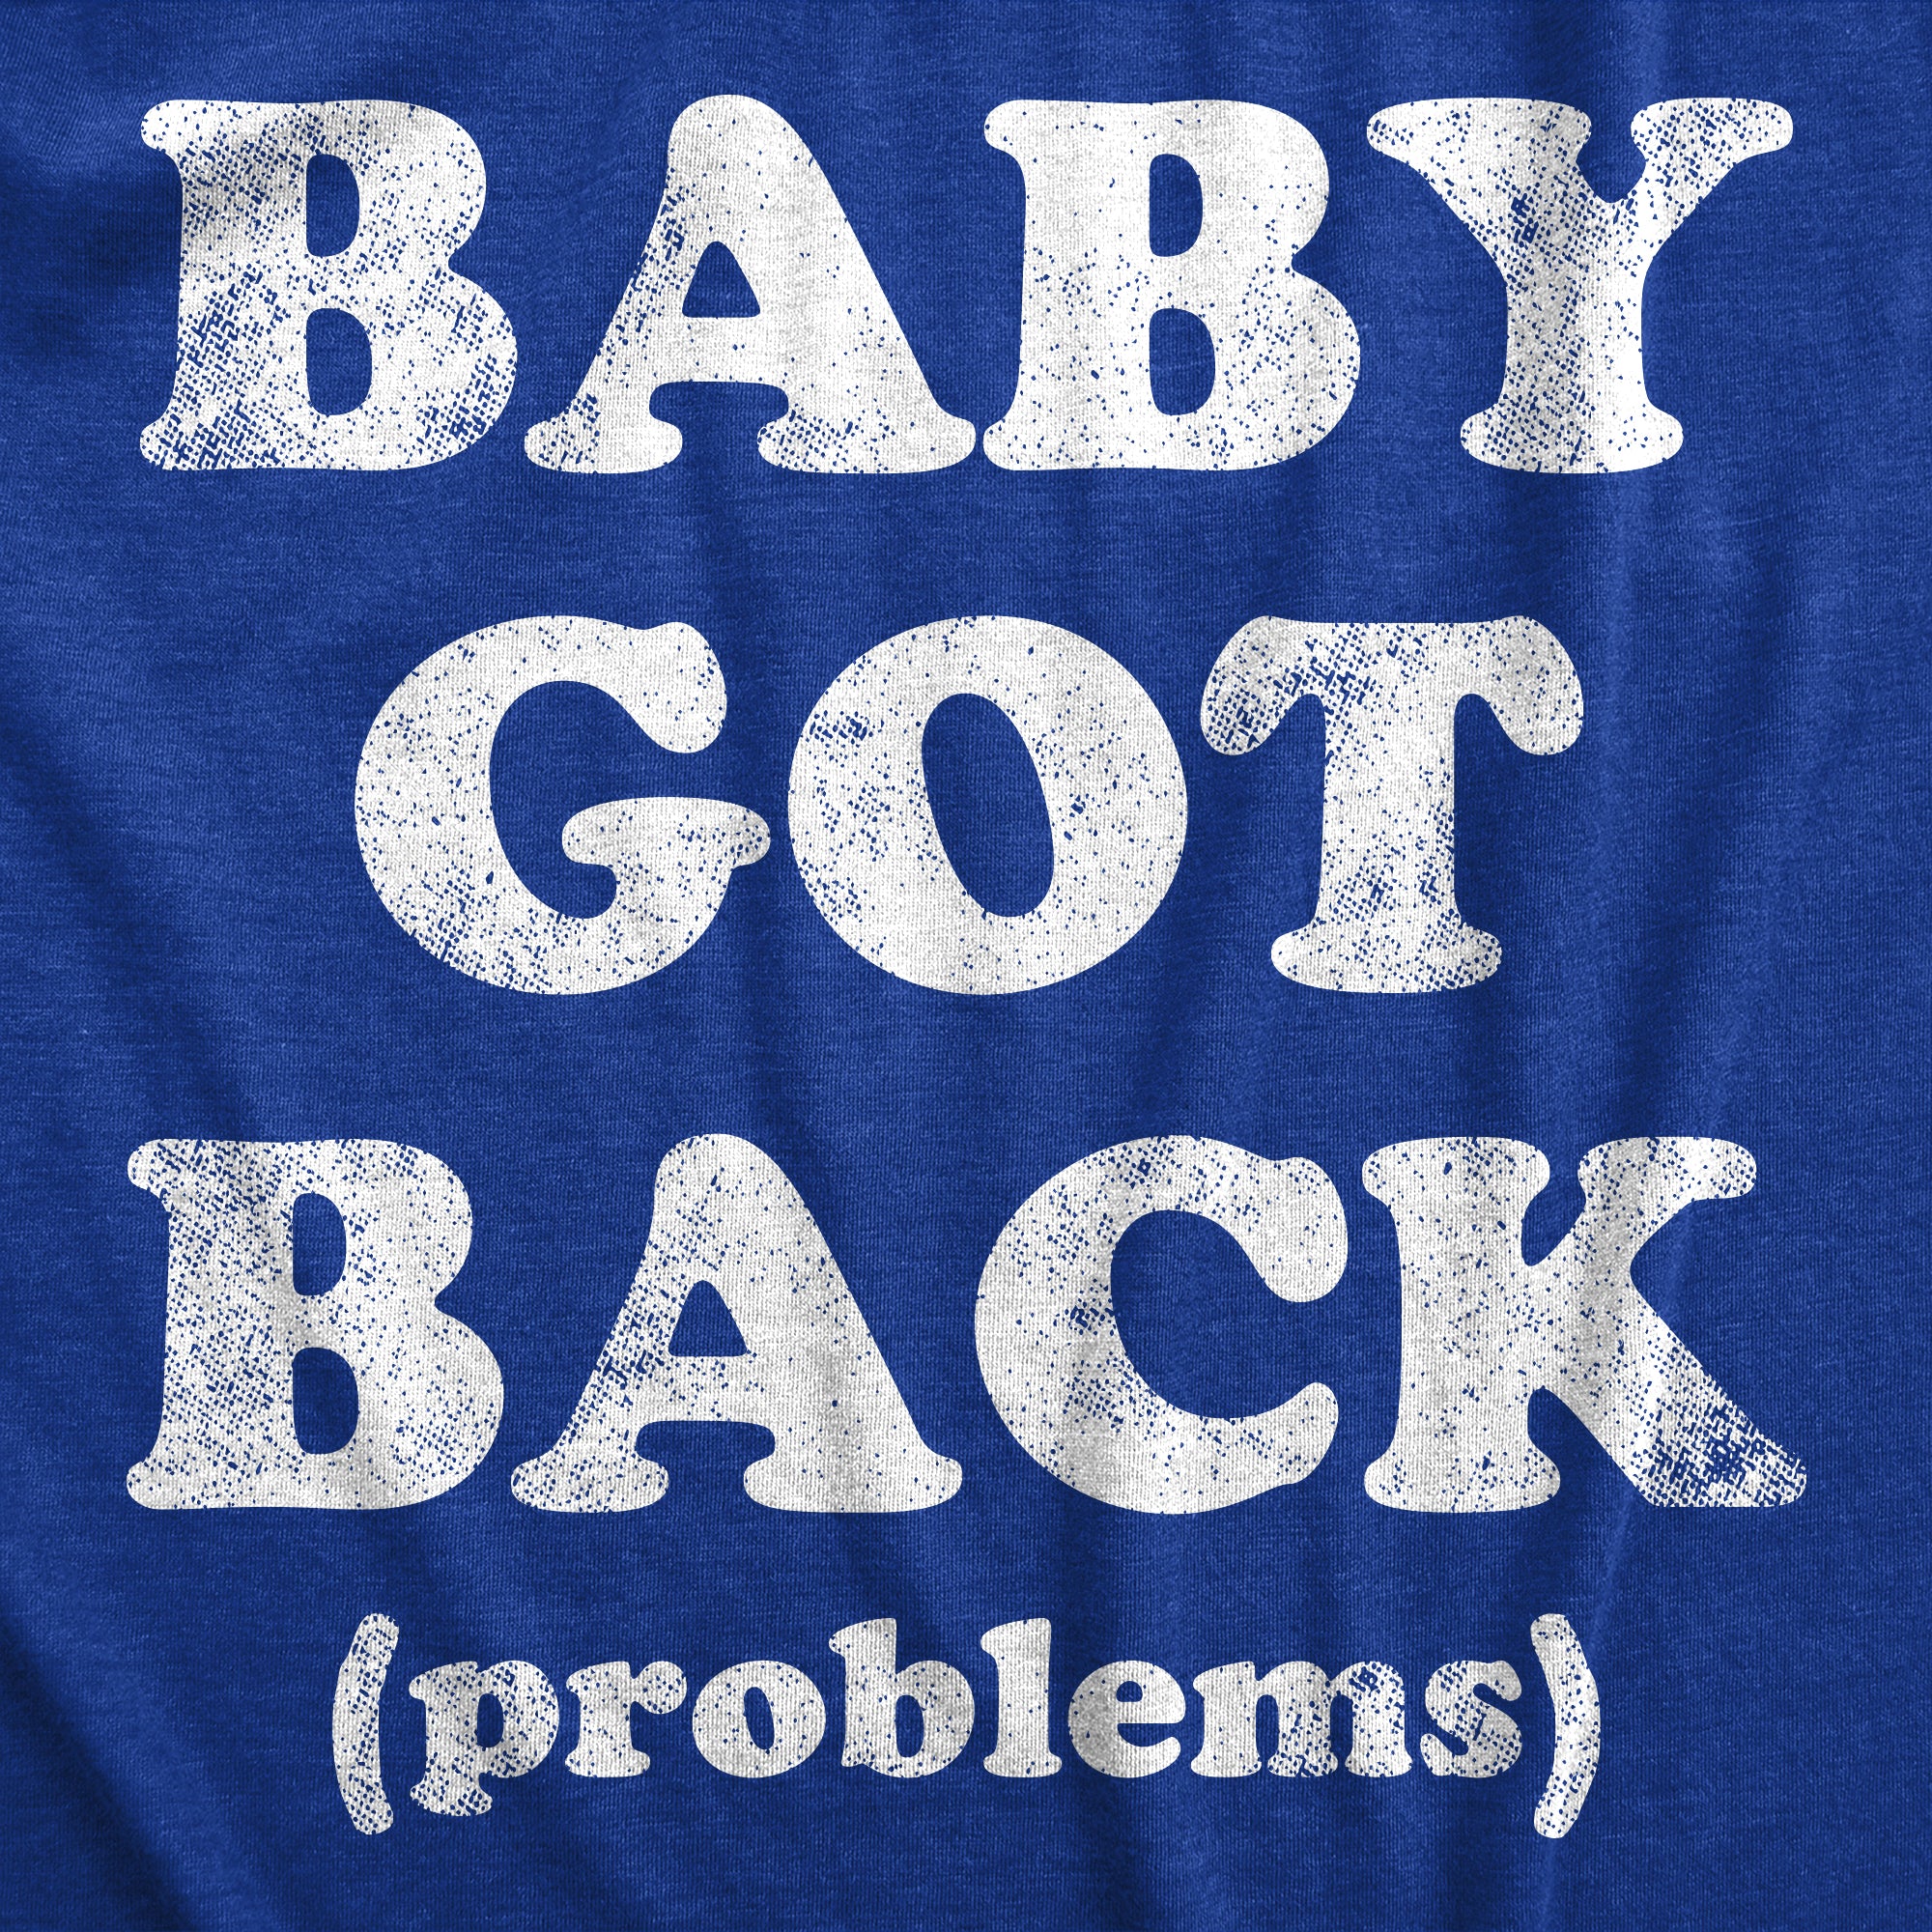 Funny Heather Royal - Back Problems Baby Got Back Problems Mens T Shirt Nerdy Sarcastic Tee